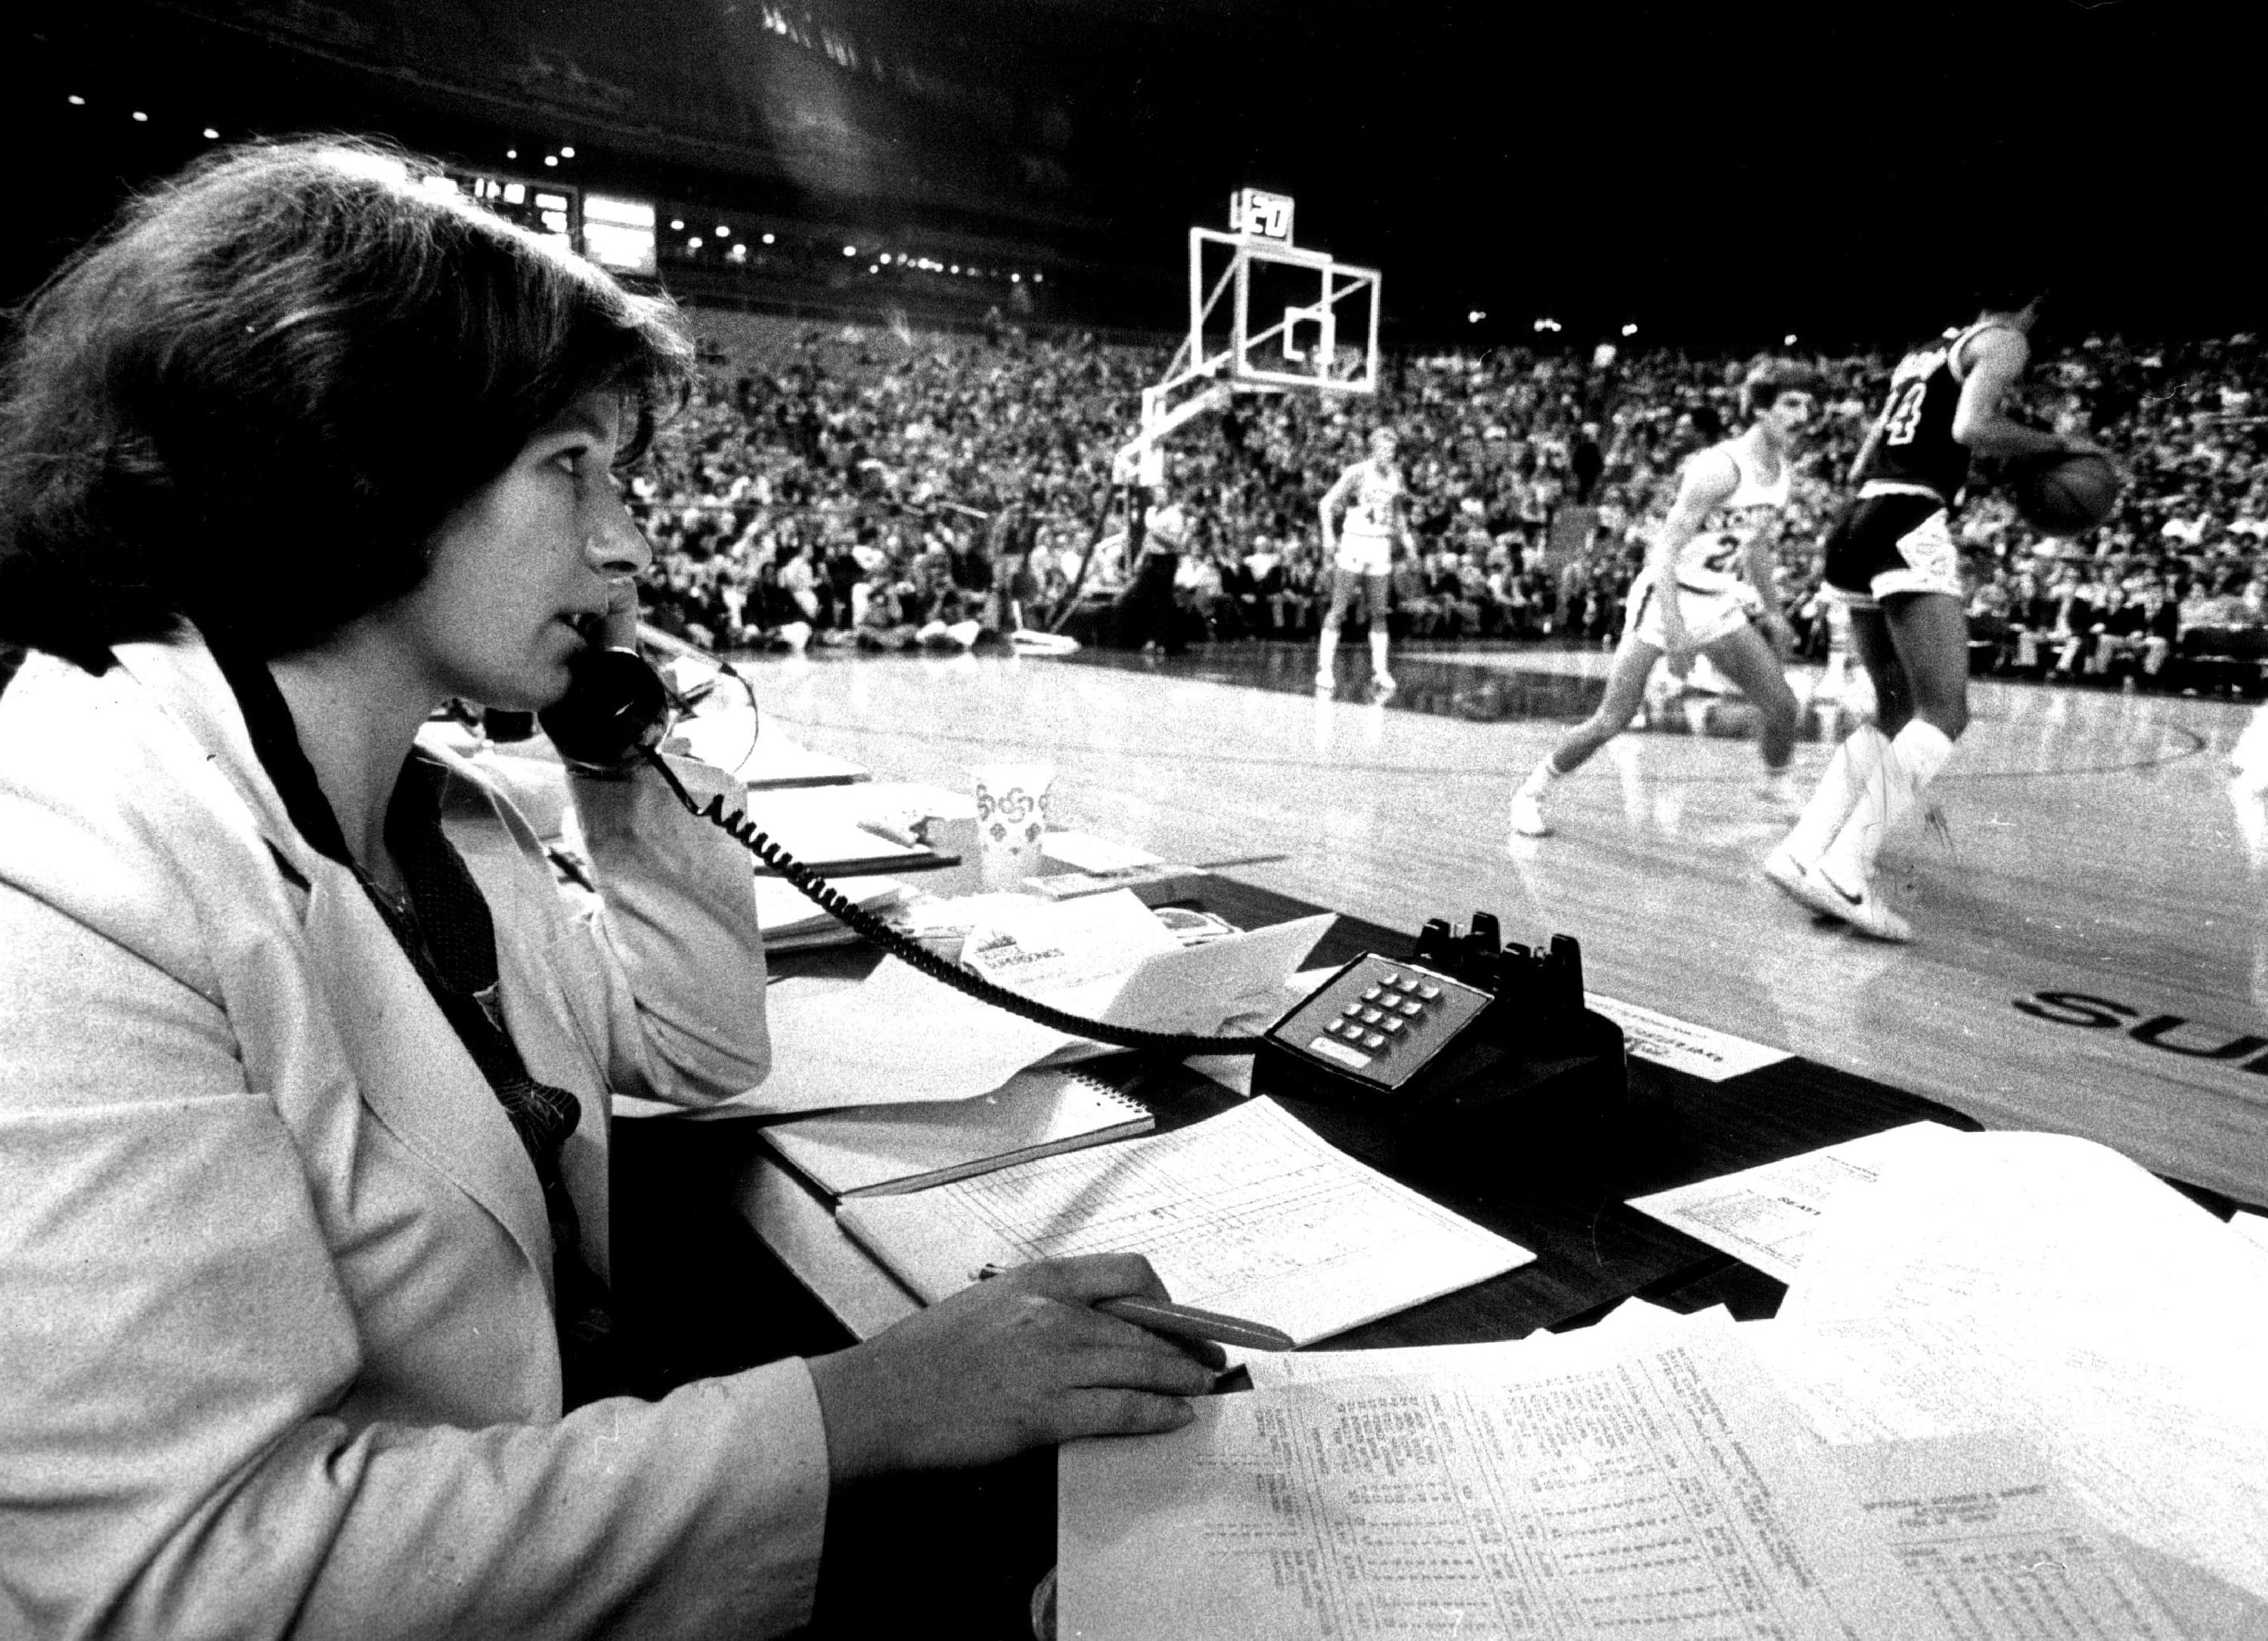 A woman sits at a table and talks on a corded telephone while at courtside during a professional basketball game